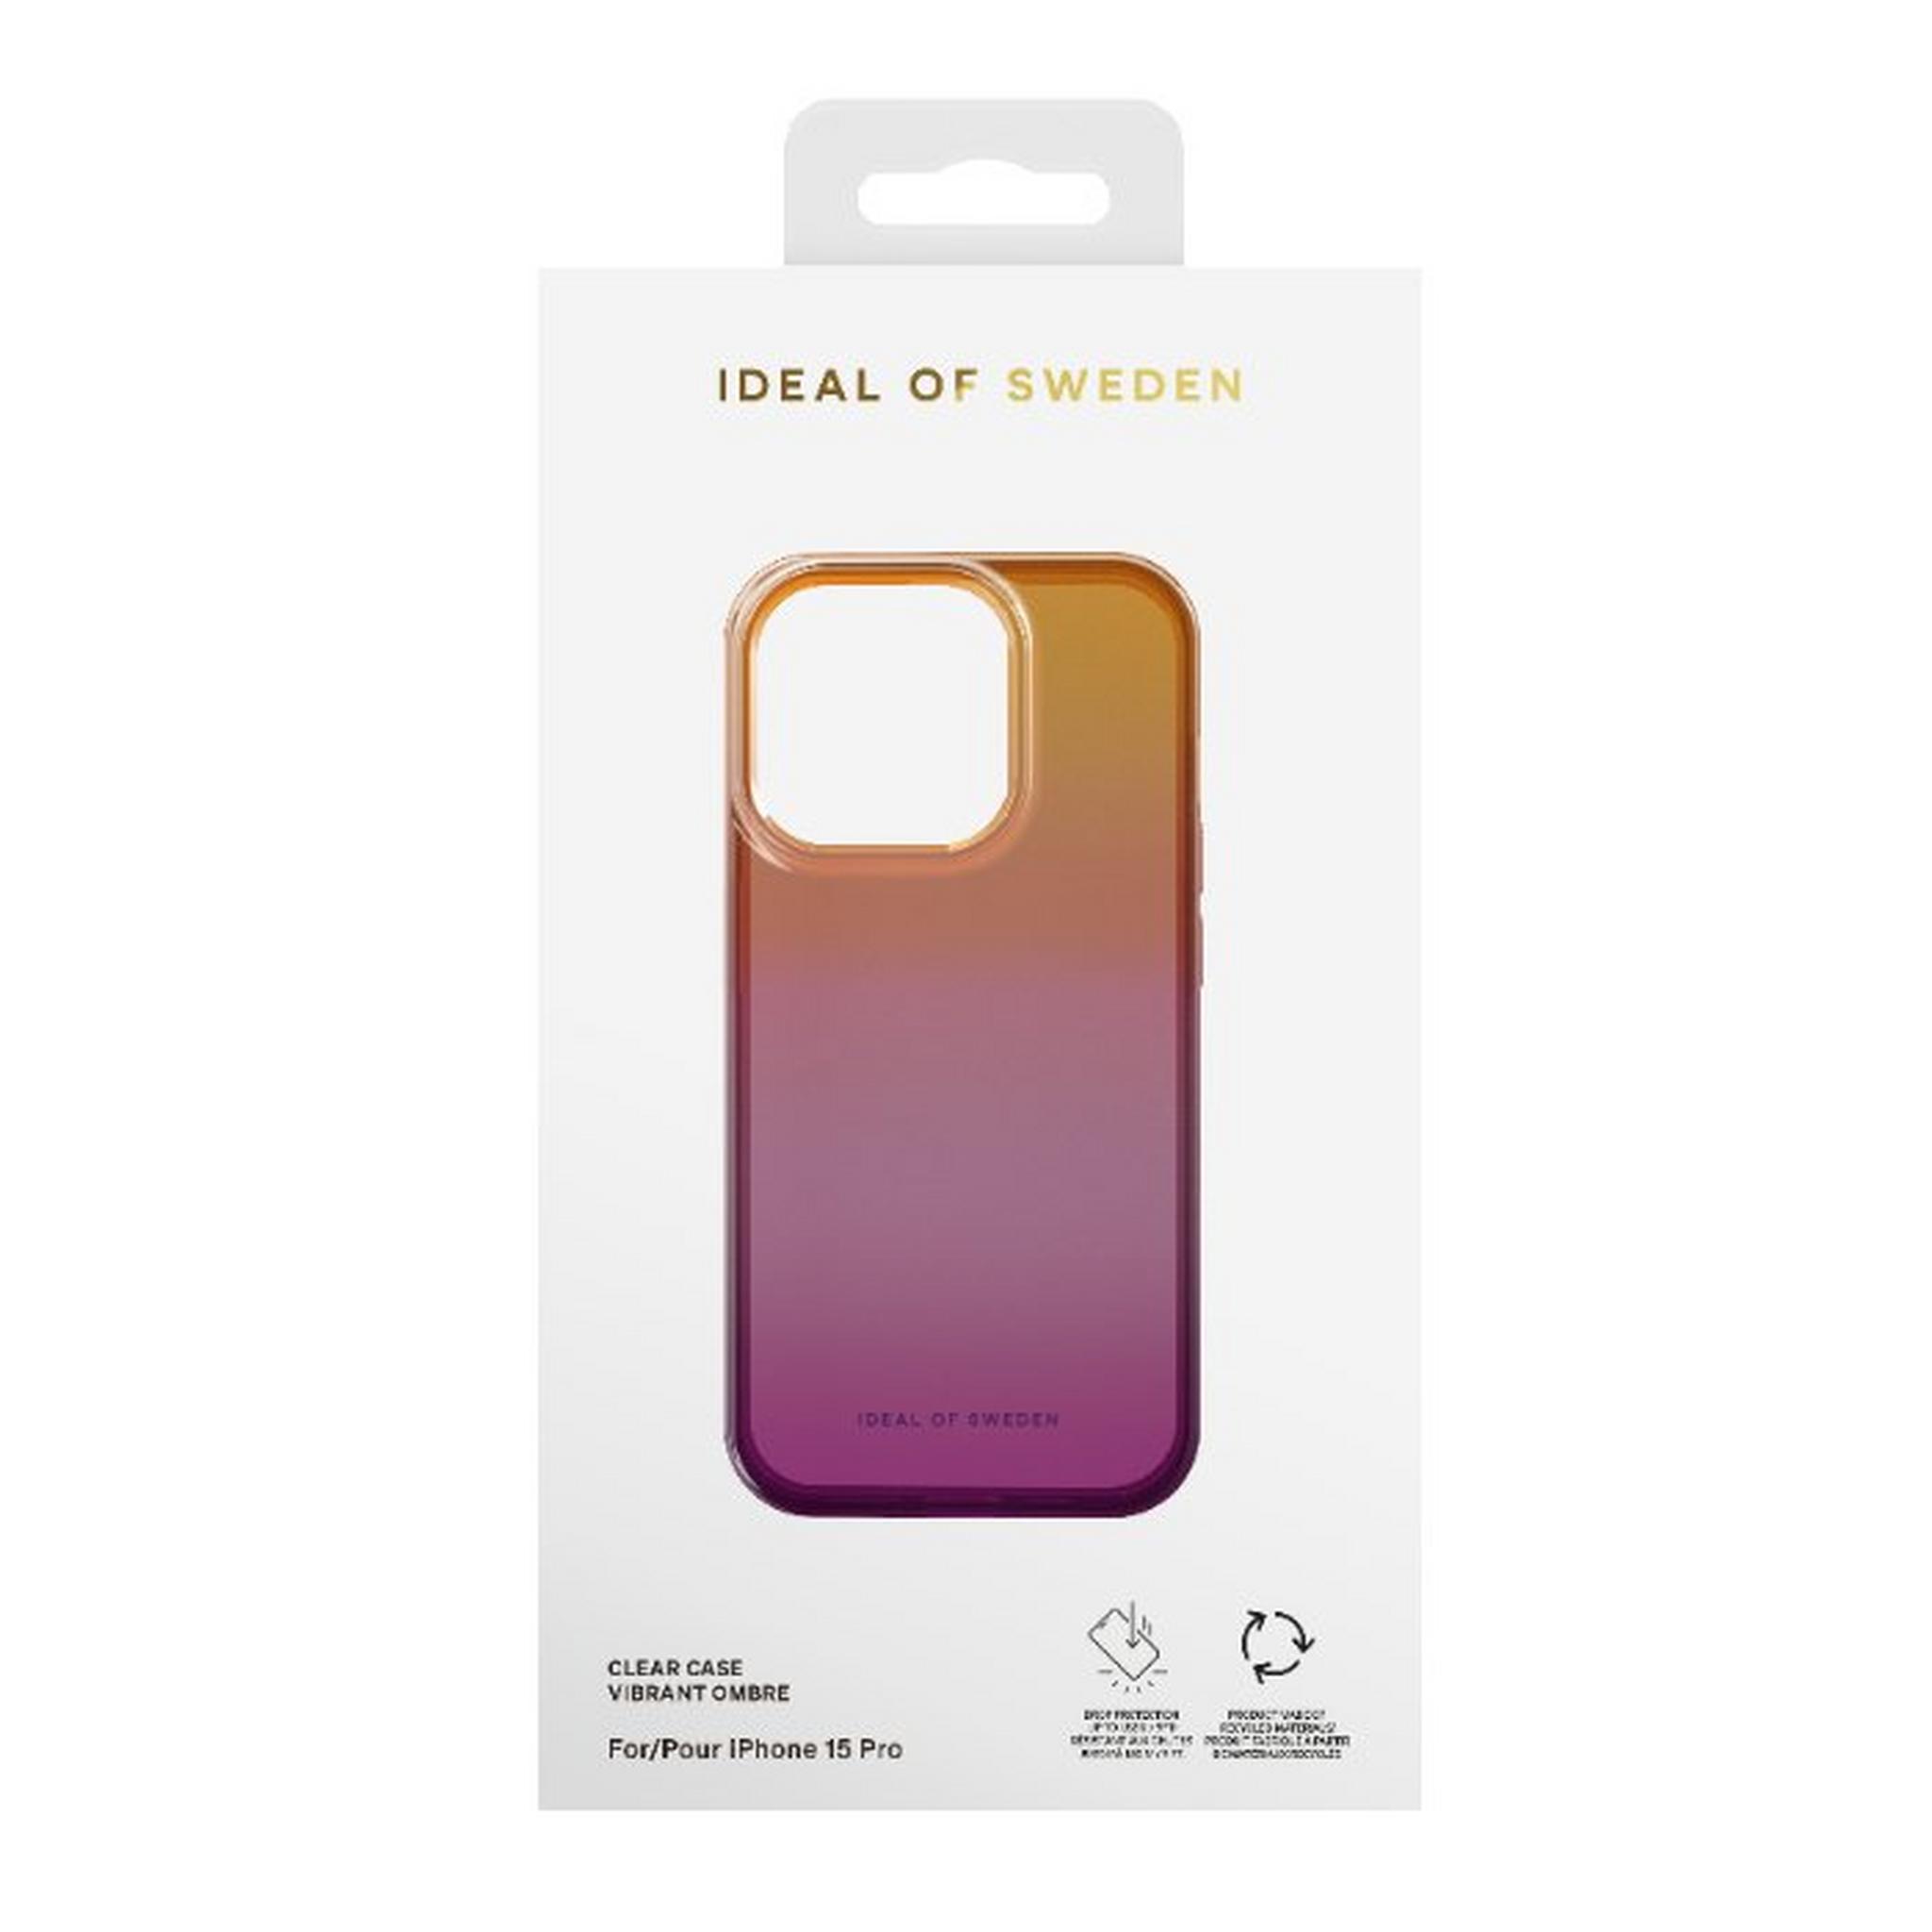 Ideal of Sweden MagSafe Clear Case for iPhone 15 Pro (IDCLCMS-I2361P-466) - Vibe Ombre